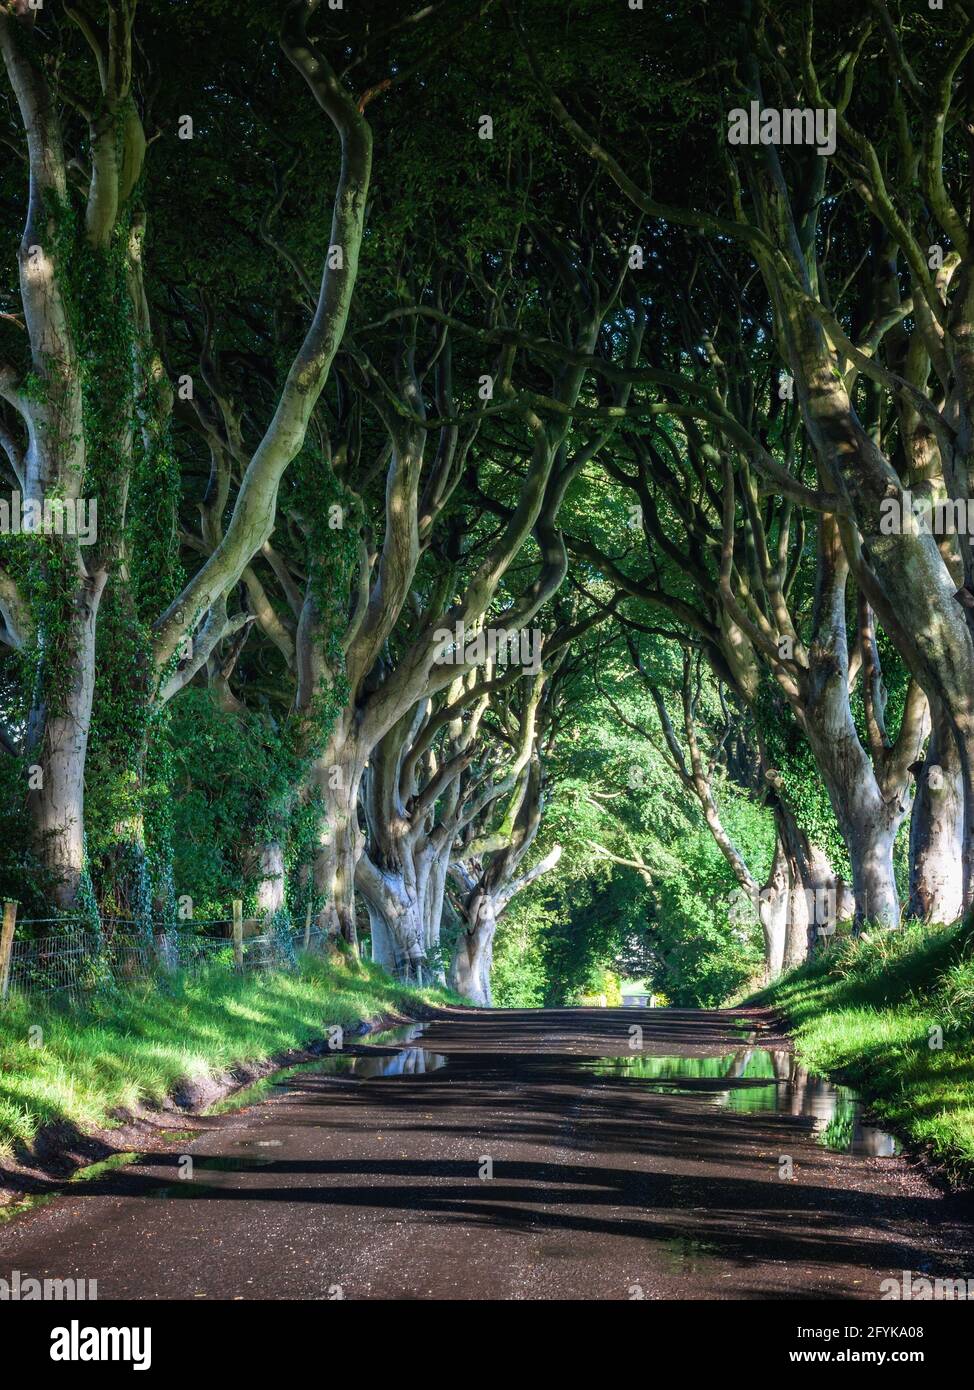 The 18th Century beech tree lined road known as the Dark Hedges in County Antrim, Northern Ireland. A filming location for Game Of Thrones. Stock Photo